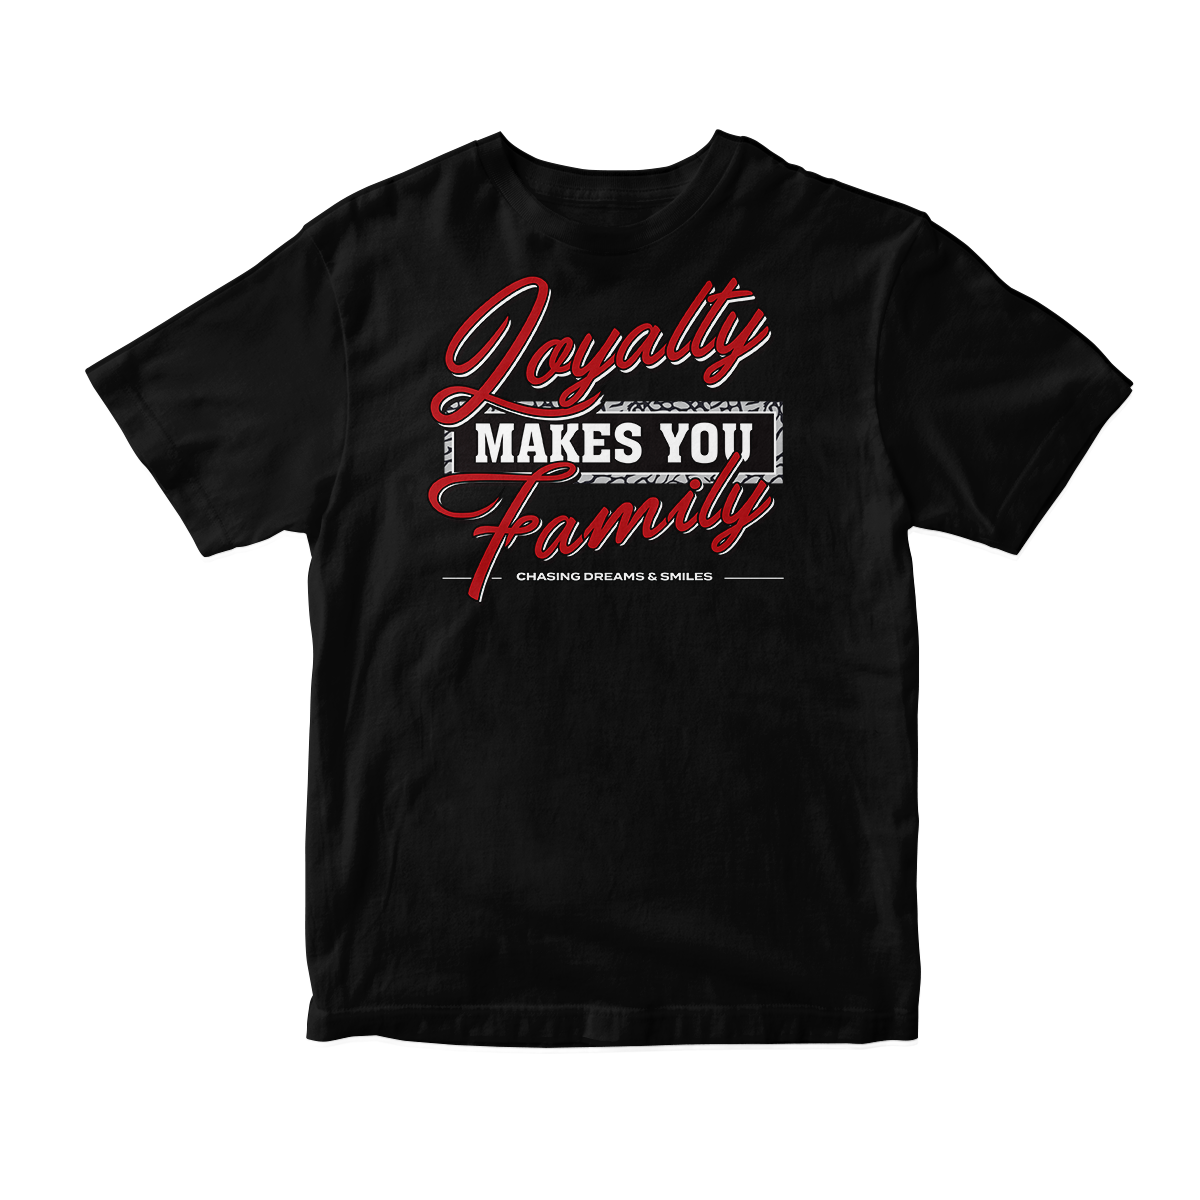 'Loyalty Makes You Family' in Red Cement CW Short Sleeve Tee